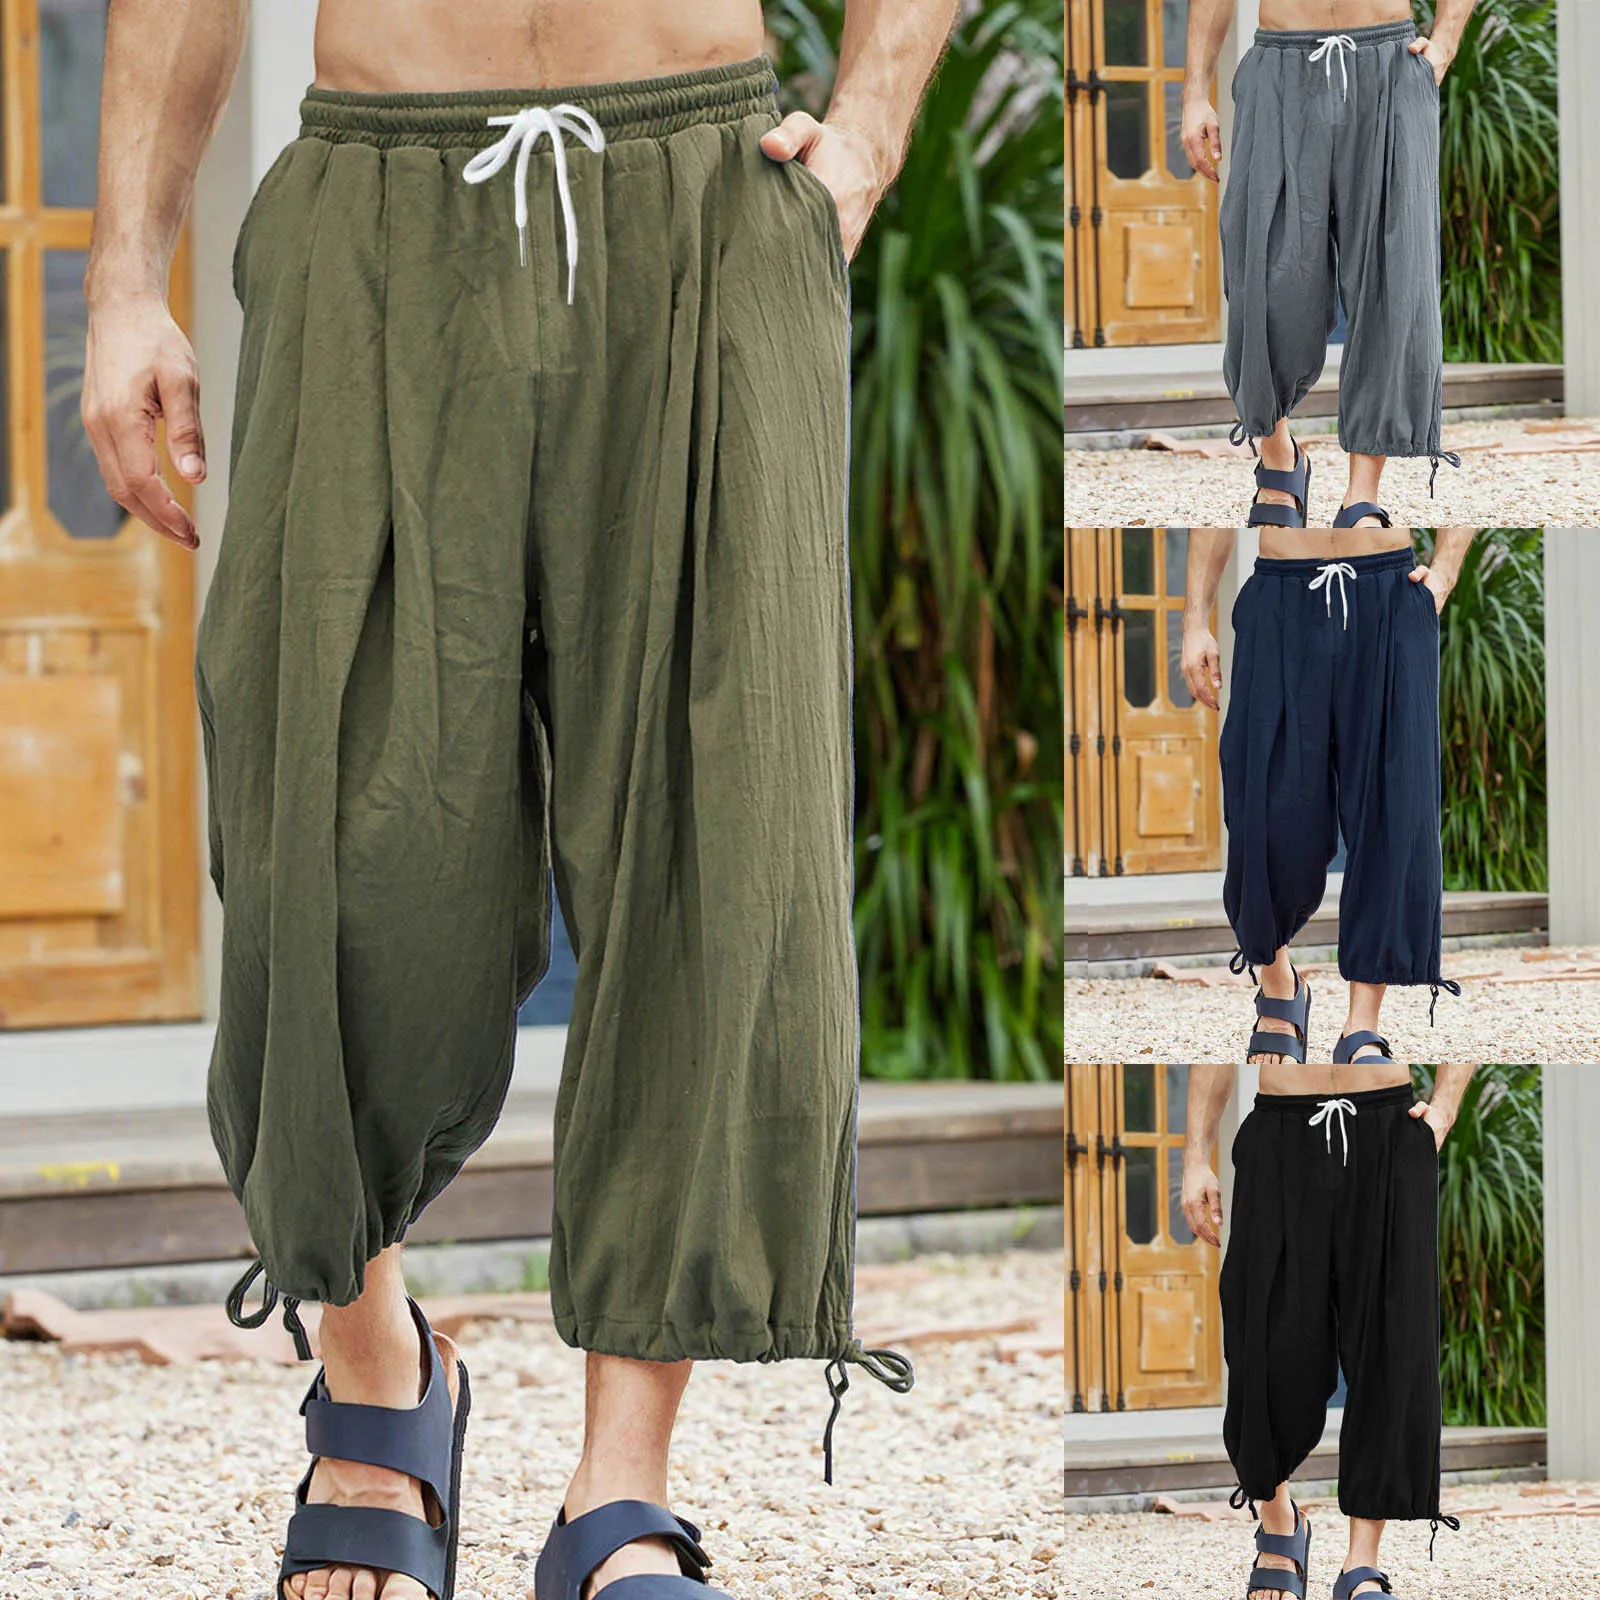 

Male Casual Solid Cropped Pants Drawstring Pocket Lace Up Hem Pant Loose Trouser Legs Trousers Fashion Pantalones Hombres